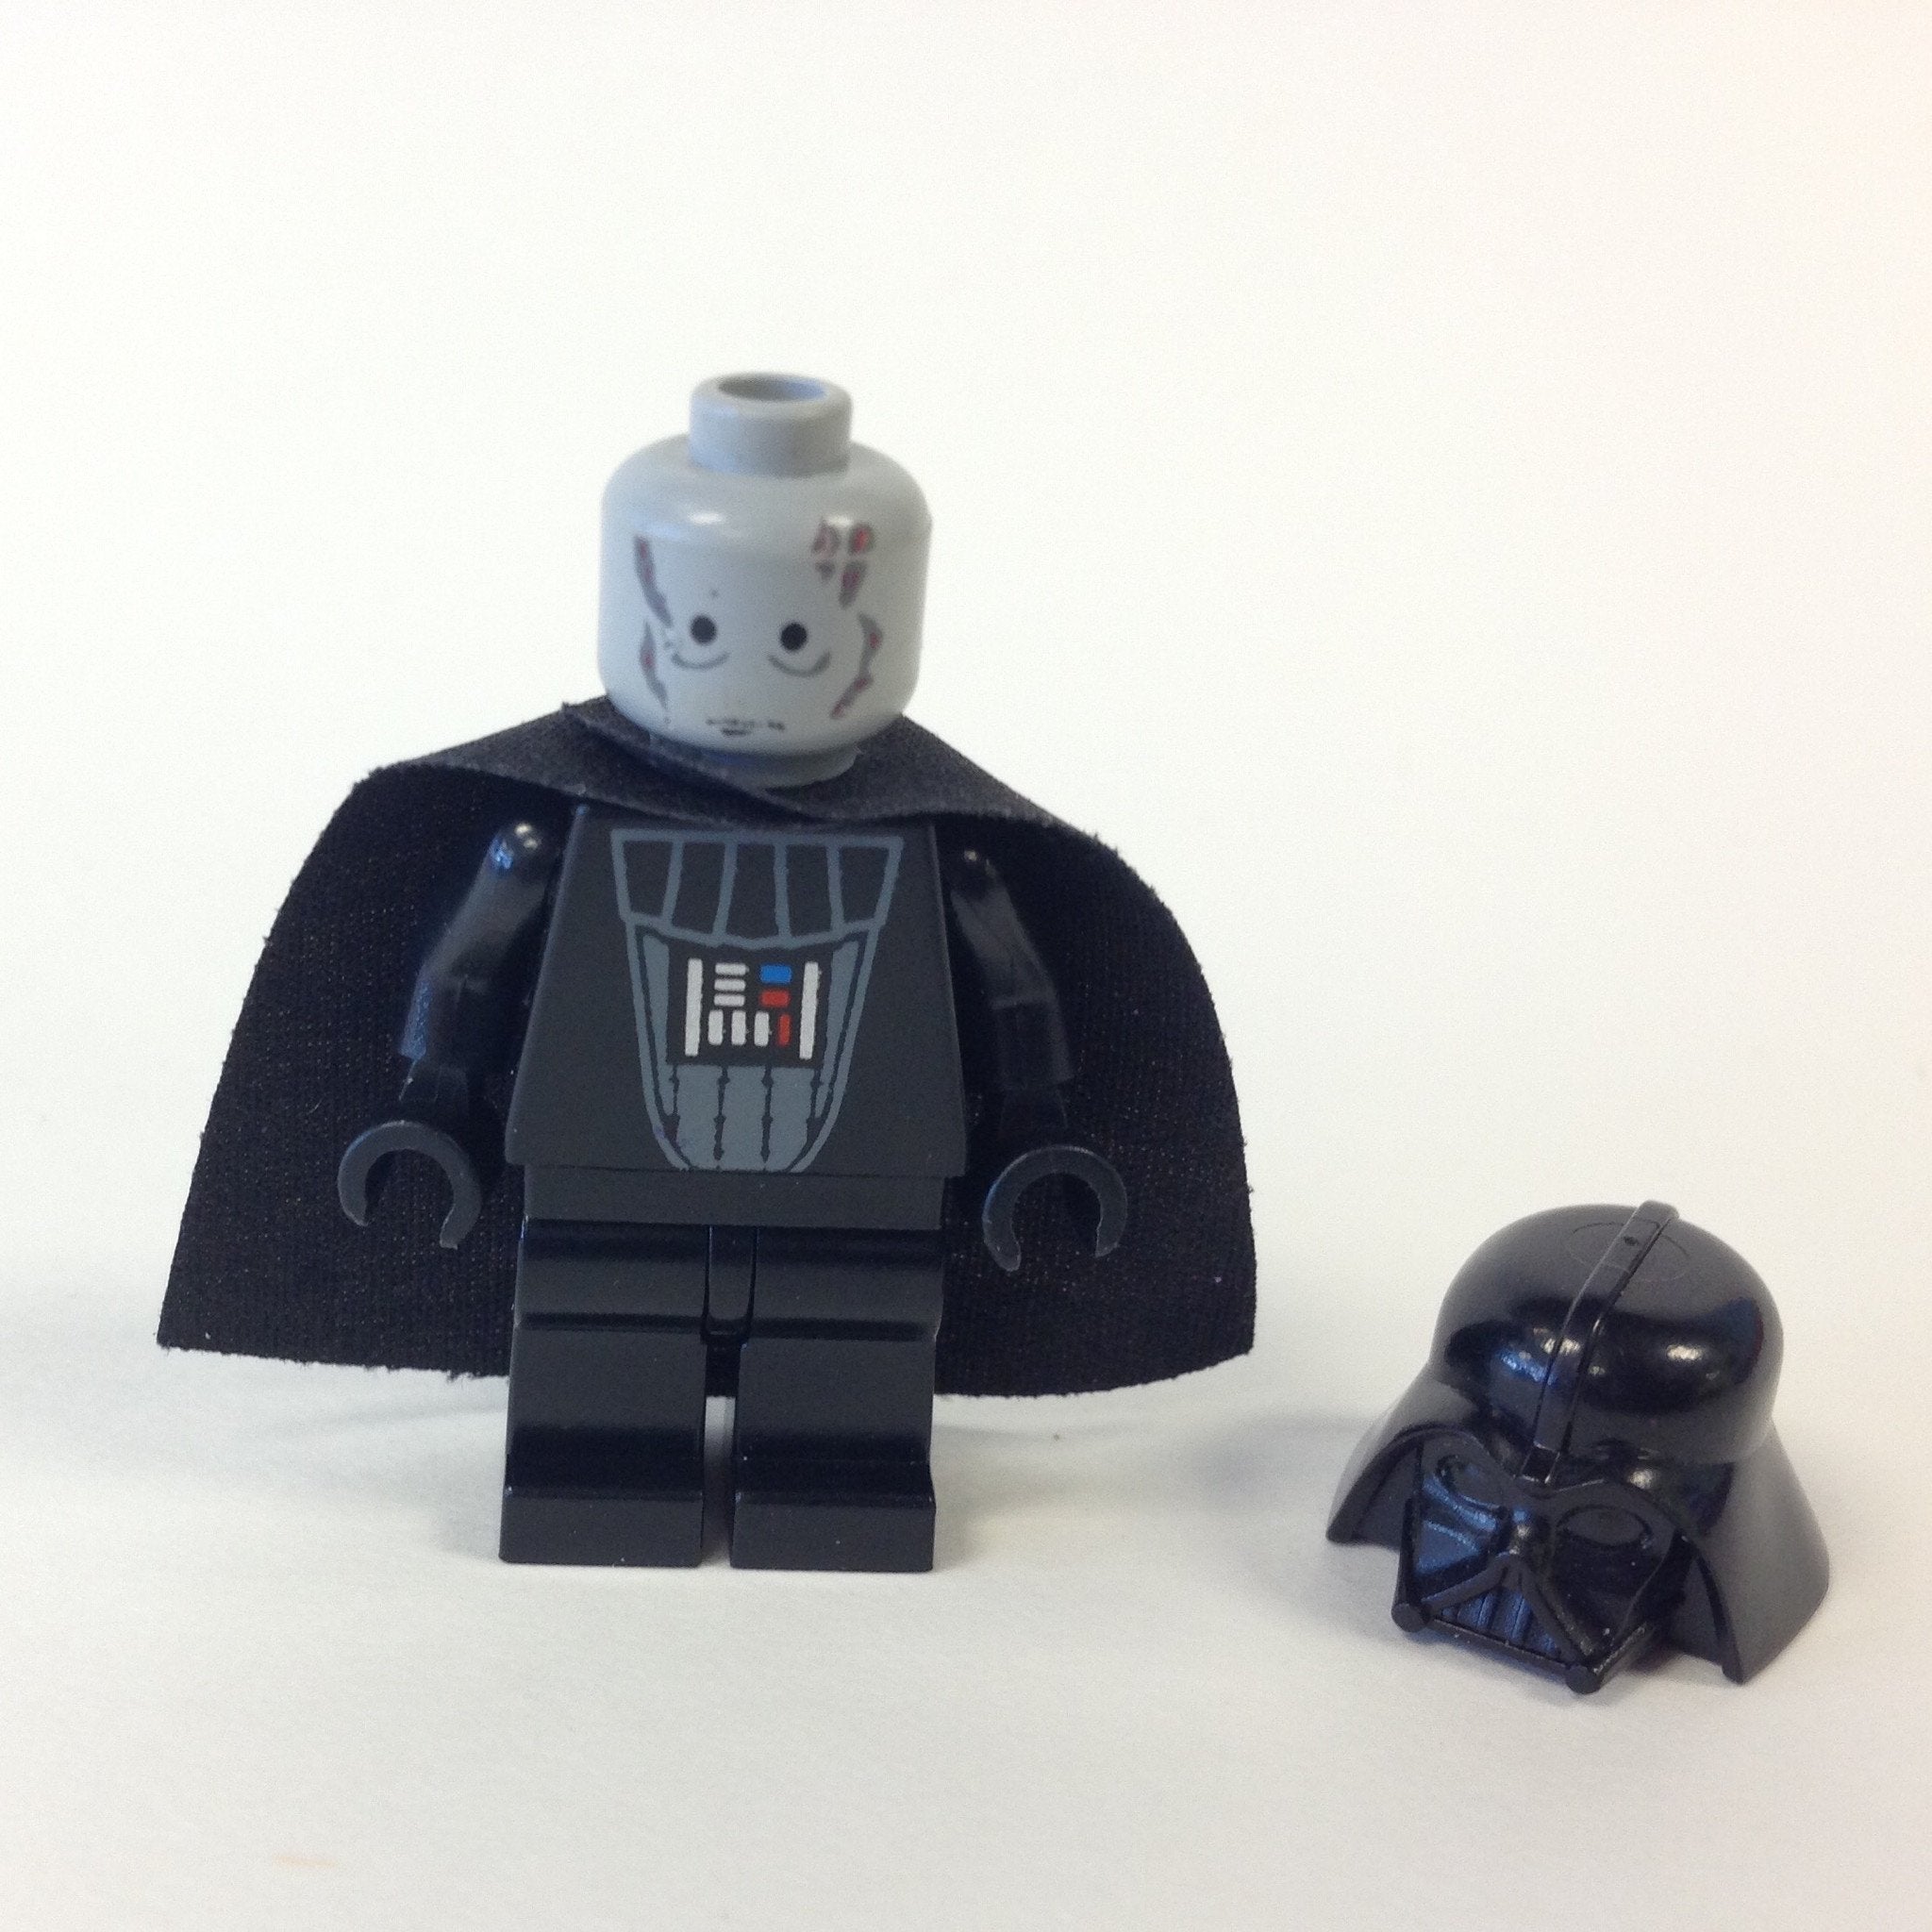  LEGO Star Wars Darth Vader Minifigure with Lightsaber (Imperial  Inspection Version) : Toys & Games